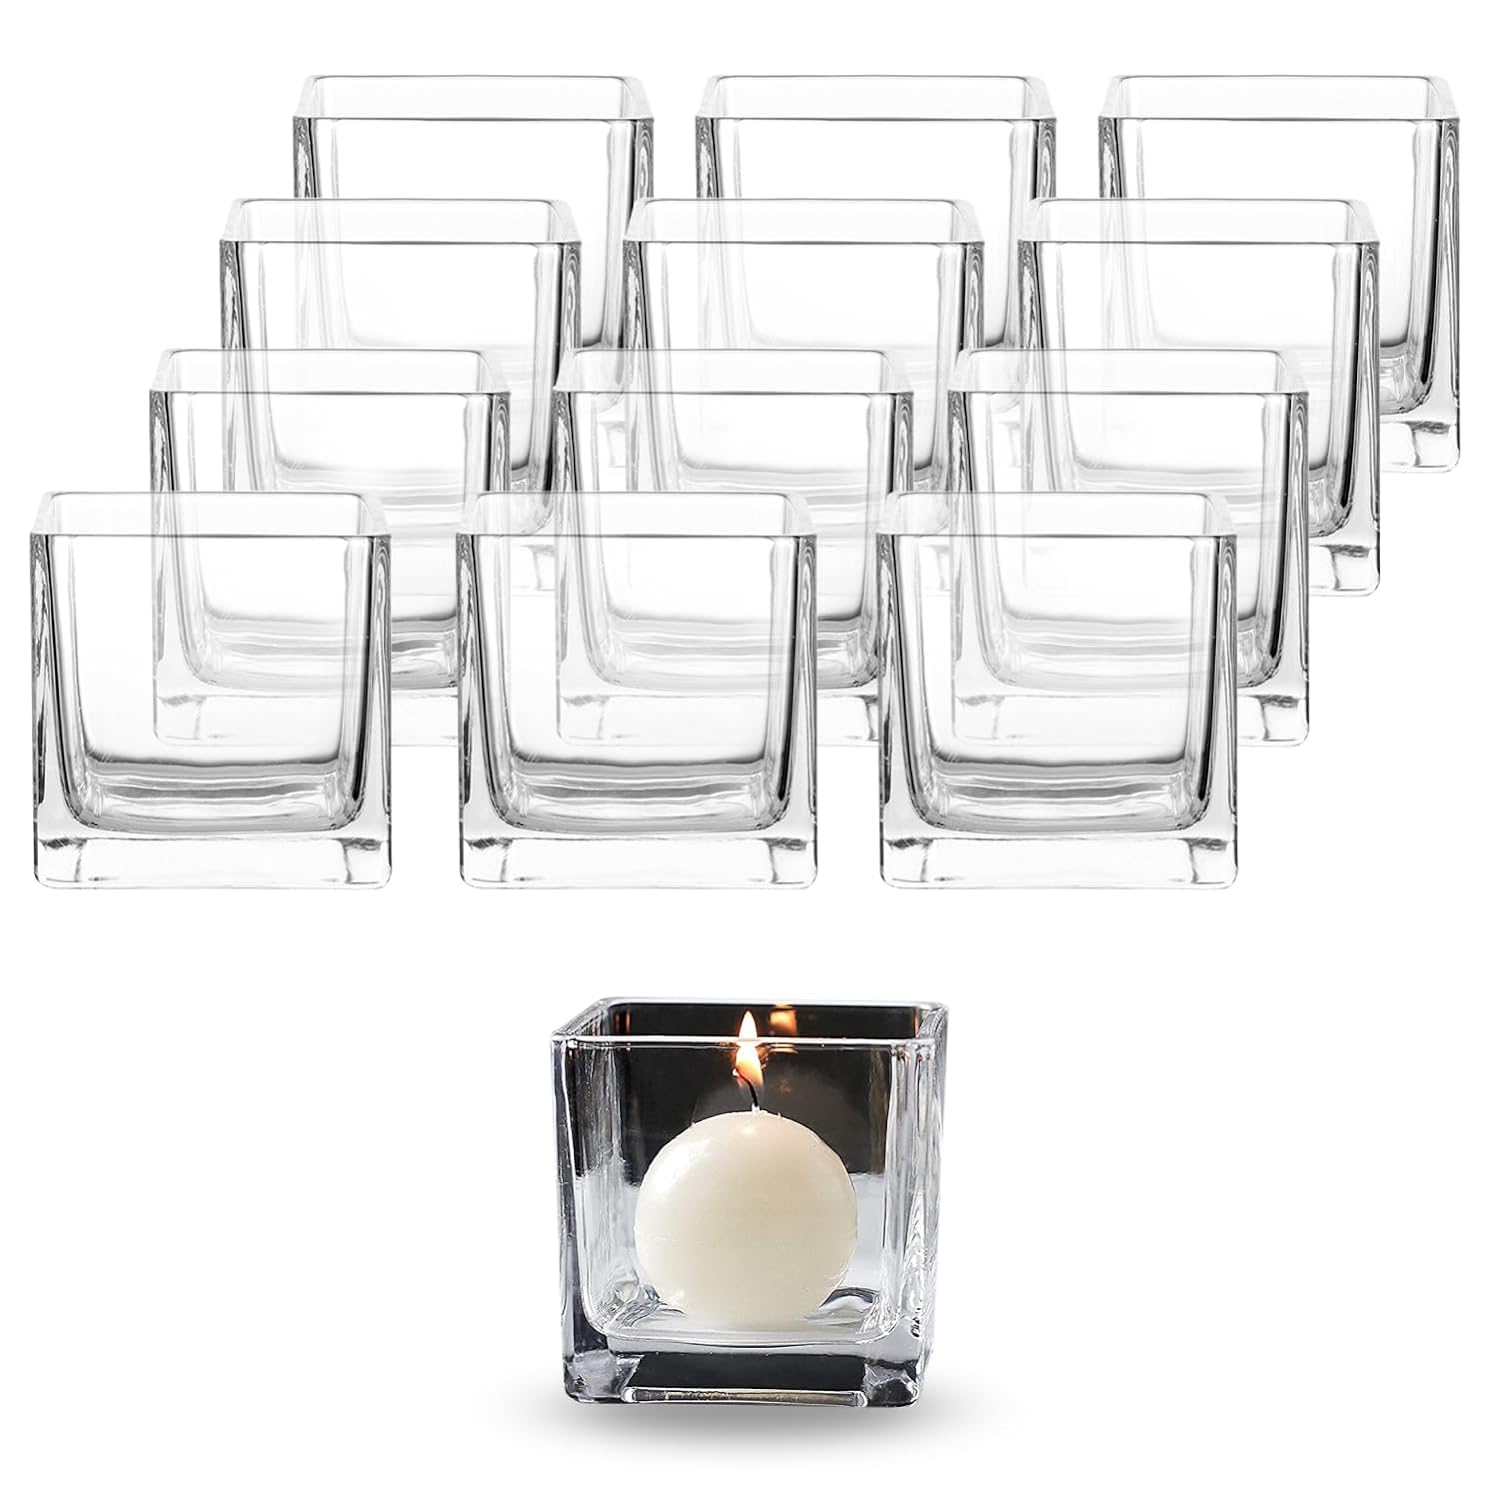 Whole Housewares Small Vases for Centerpieces - 3 Square Clear Glass Vases - 12 Pack Cube Vase for Flowers - Bulk Short Tealight, Candle, Flower Holder - Crystal Clear Squared Vase for Home Office